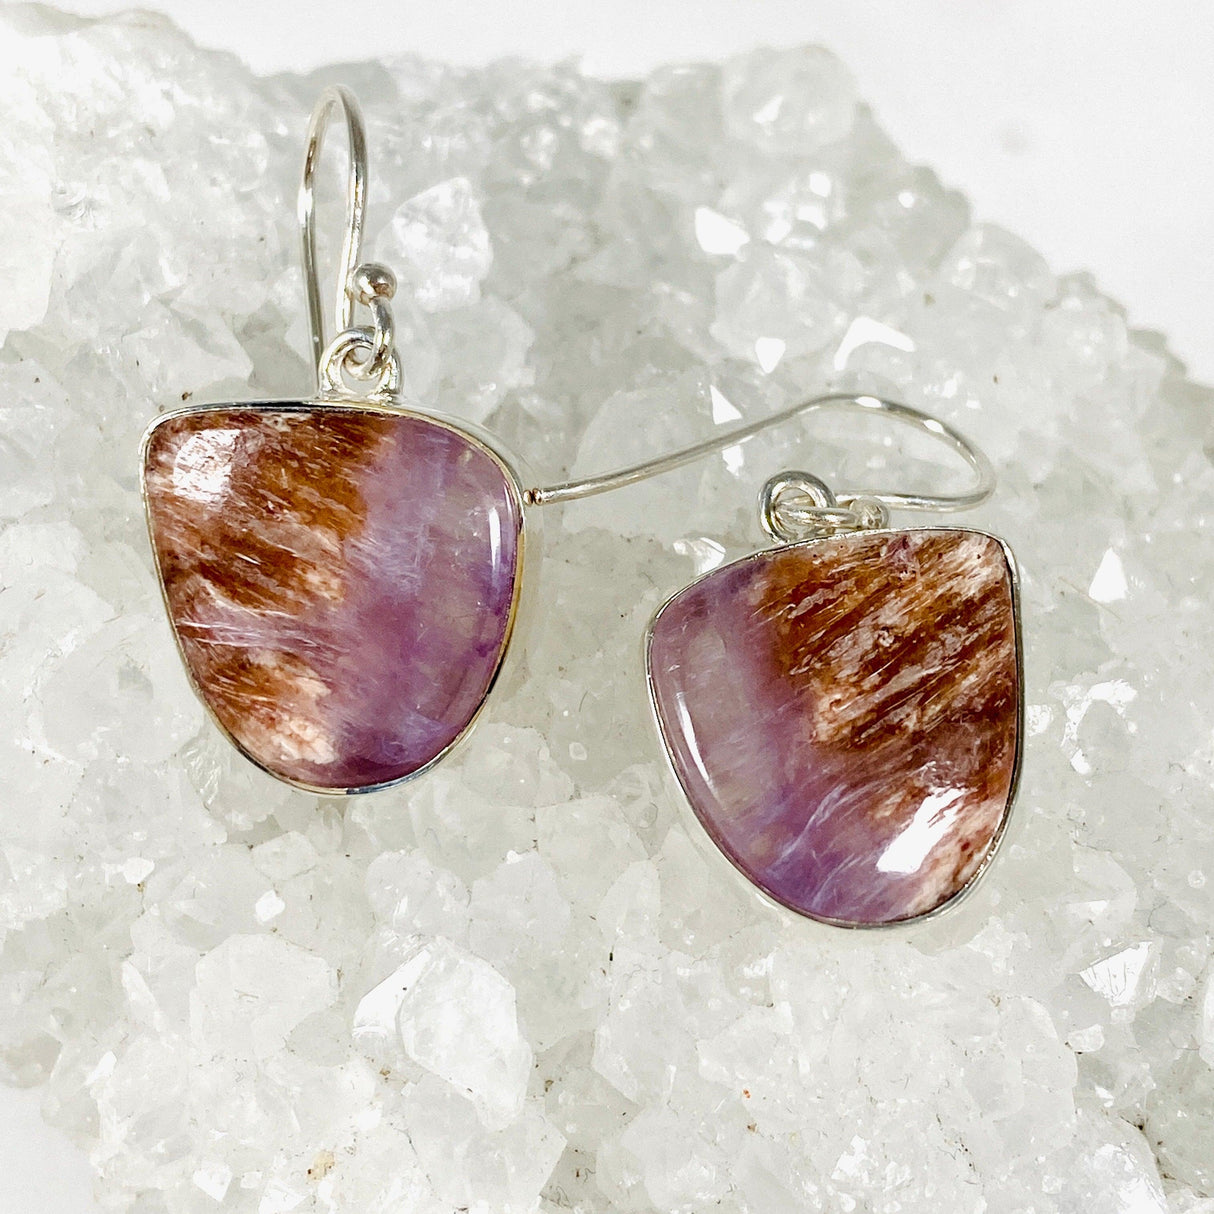 Purple Charoite free form earrings in sterling silver sitting on a crystal cluster